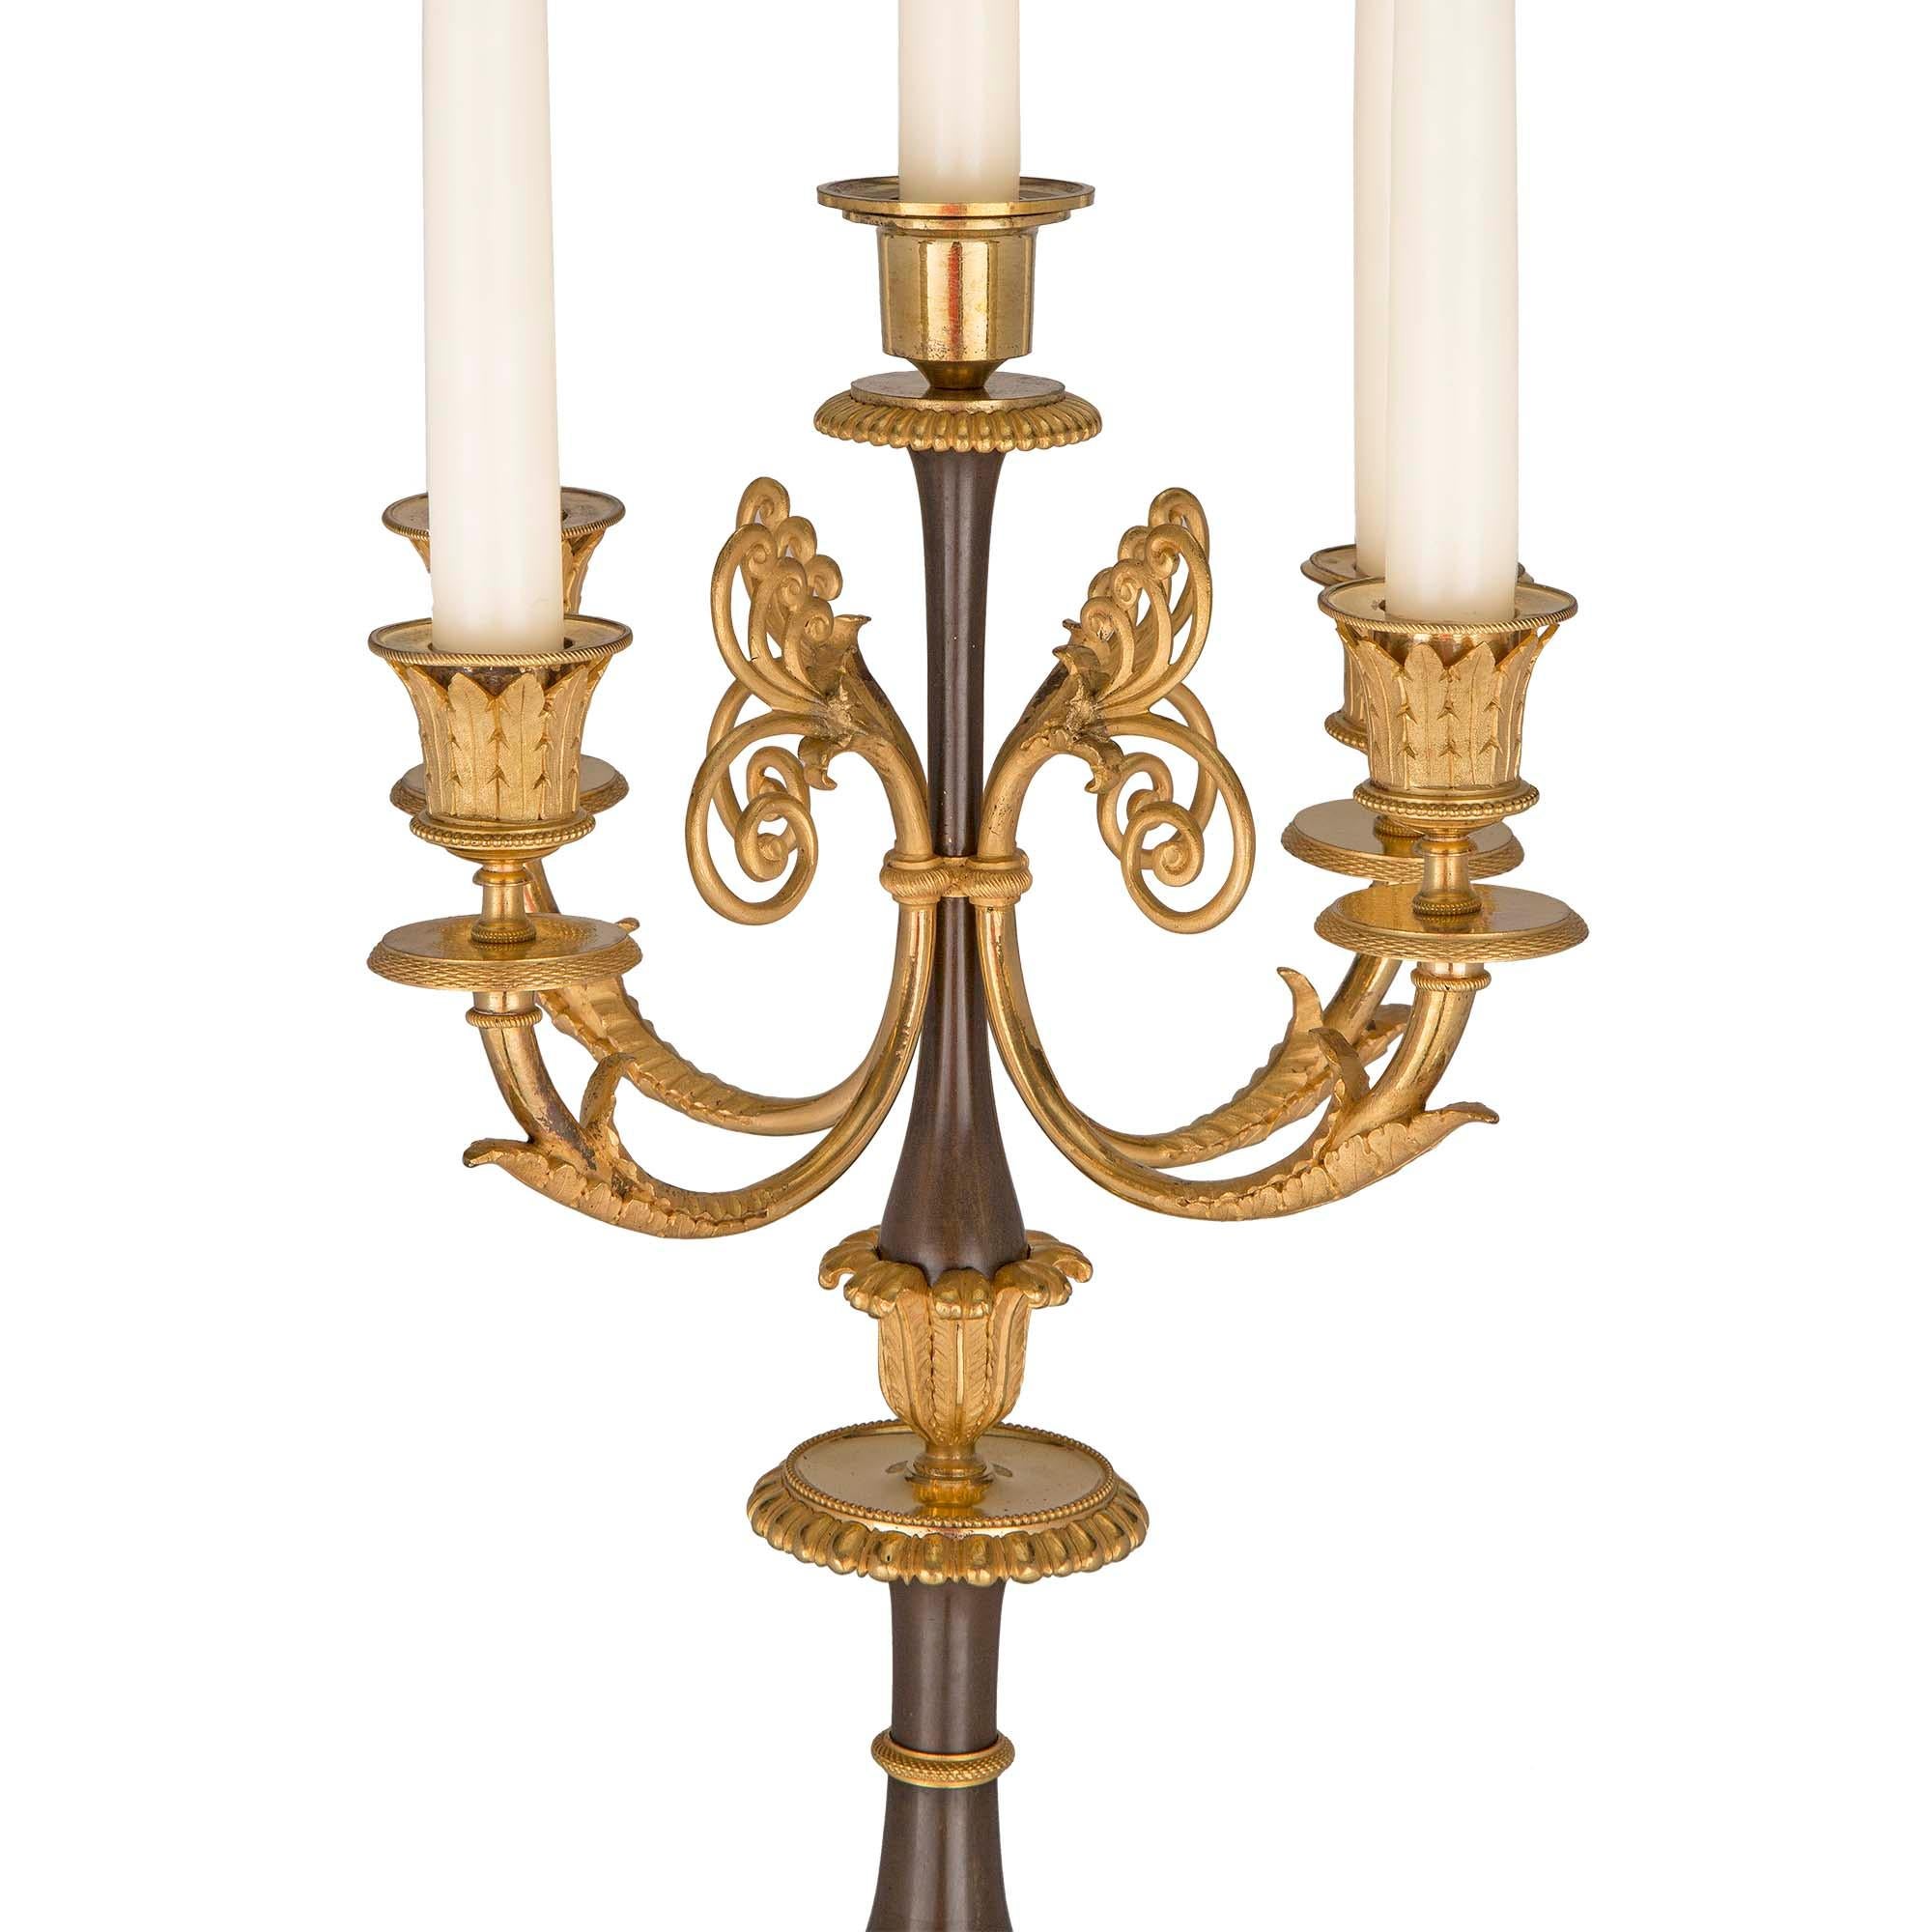 Patinated Pair of French 19th Century First Empire Period Bronze and Ormolu Candelabras For Sale